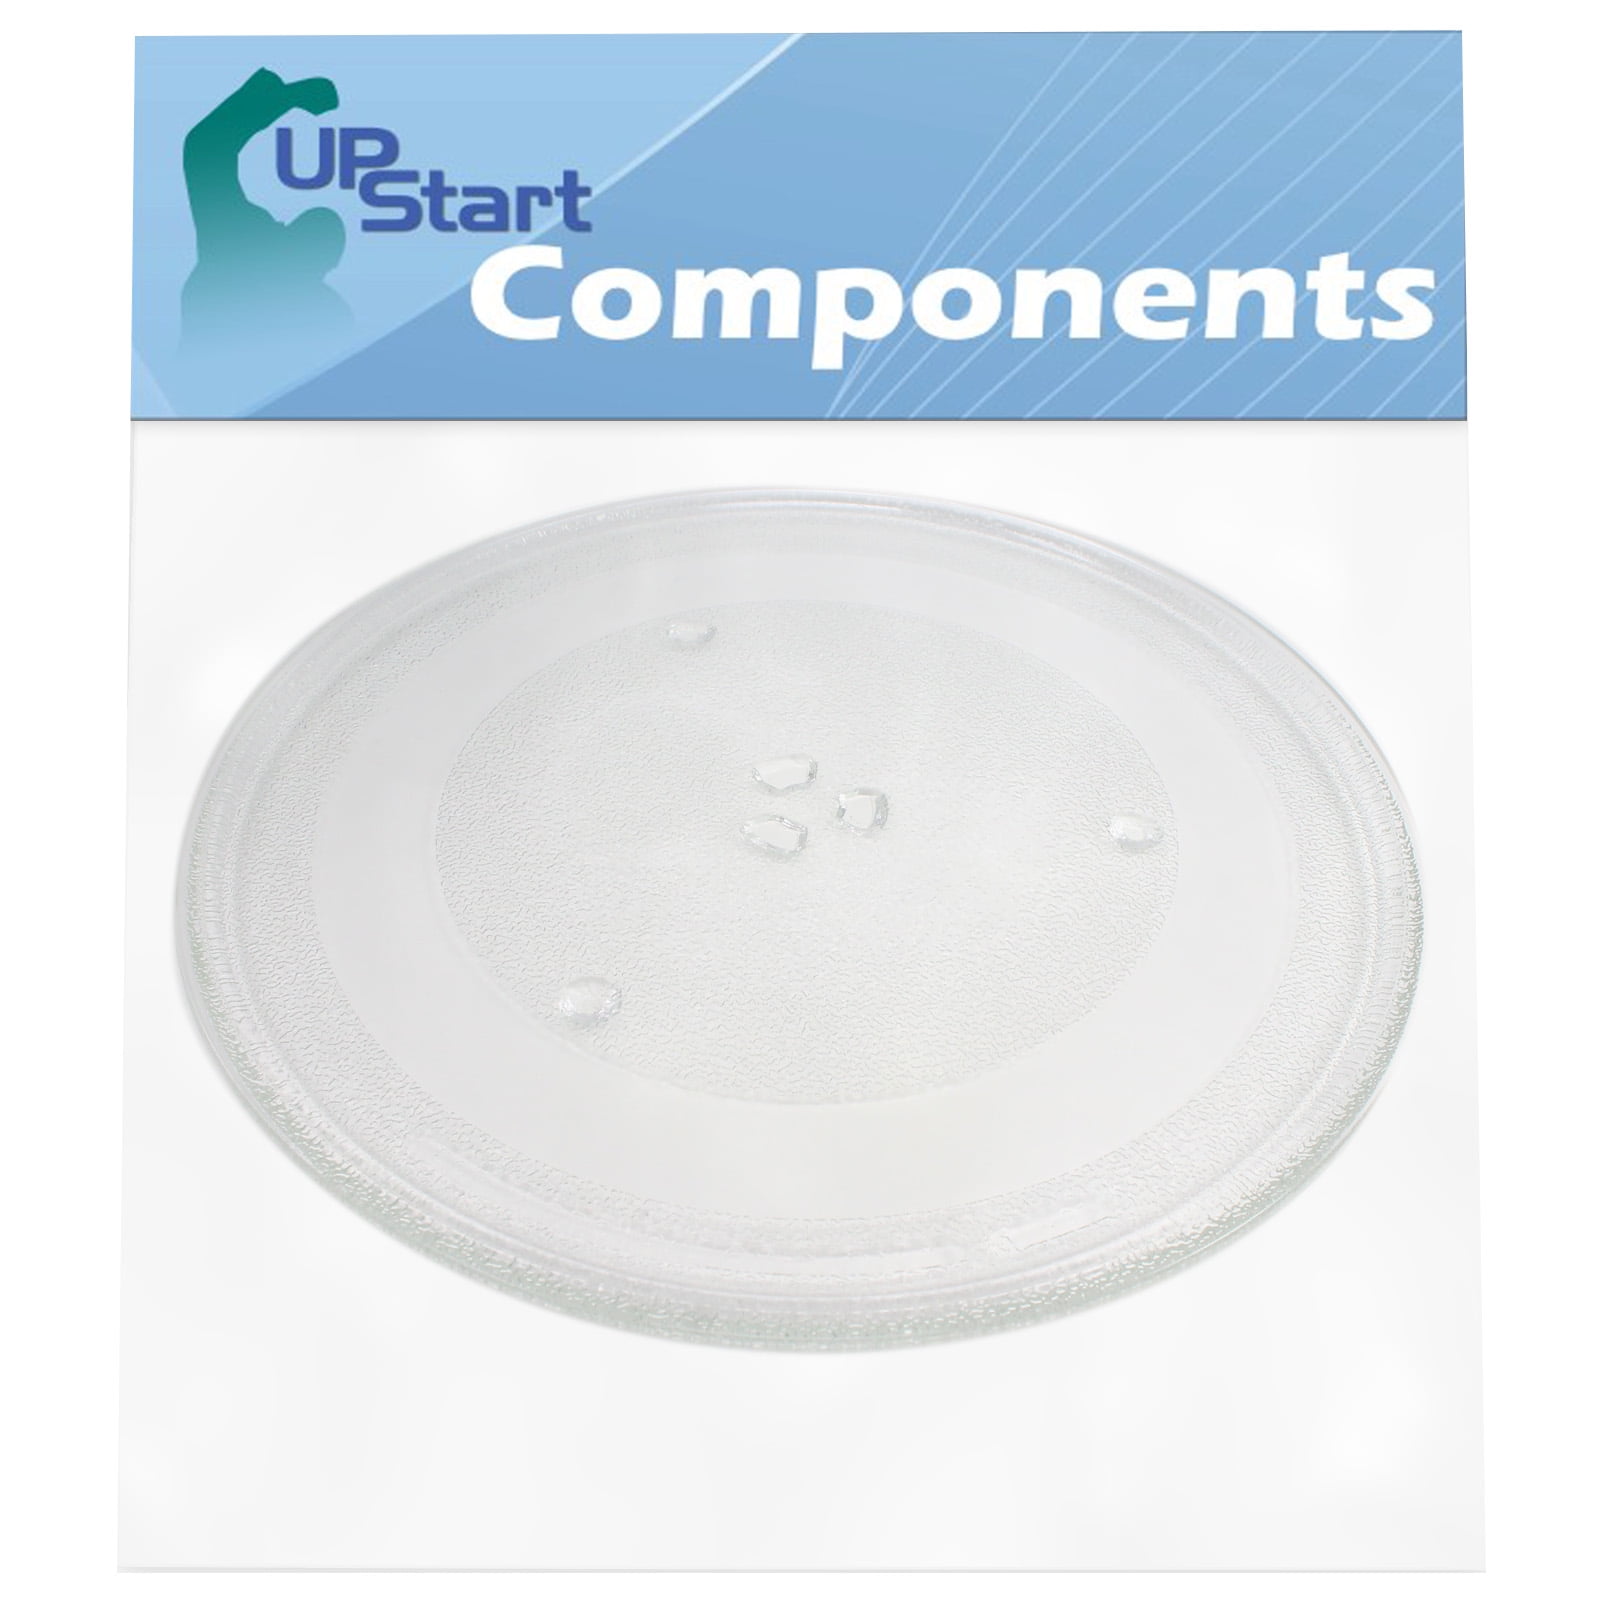 Microwave Glass Plate for Kenmore 3390W1A035D